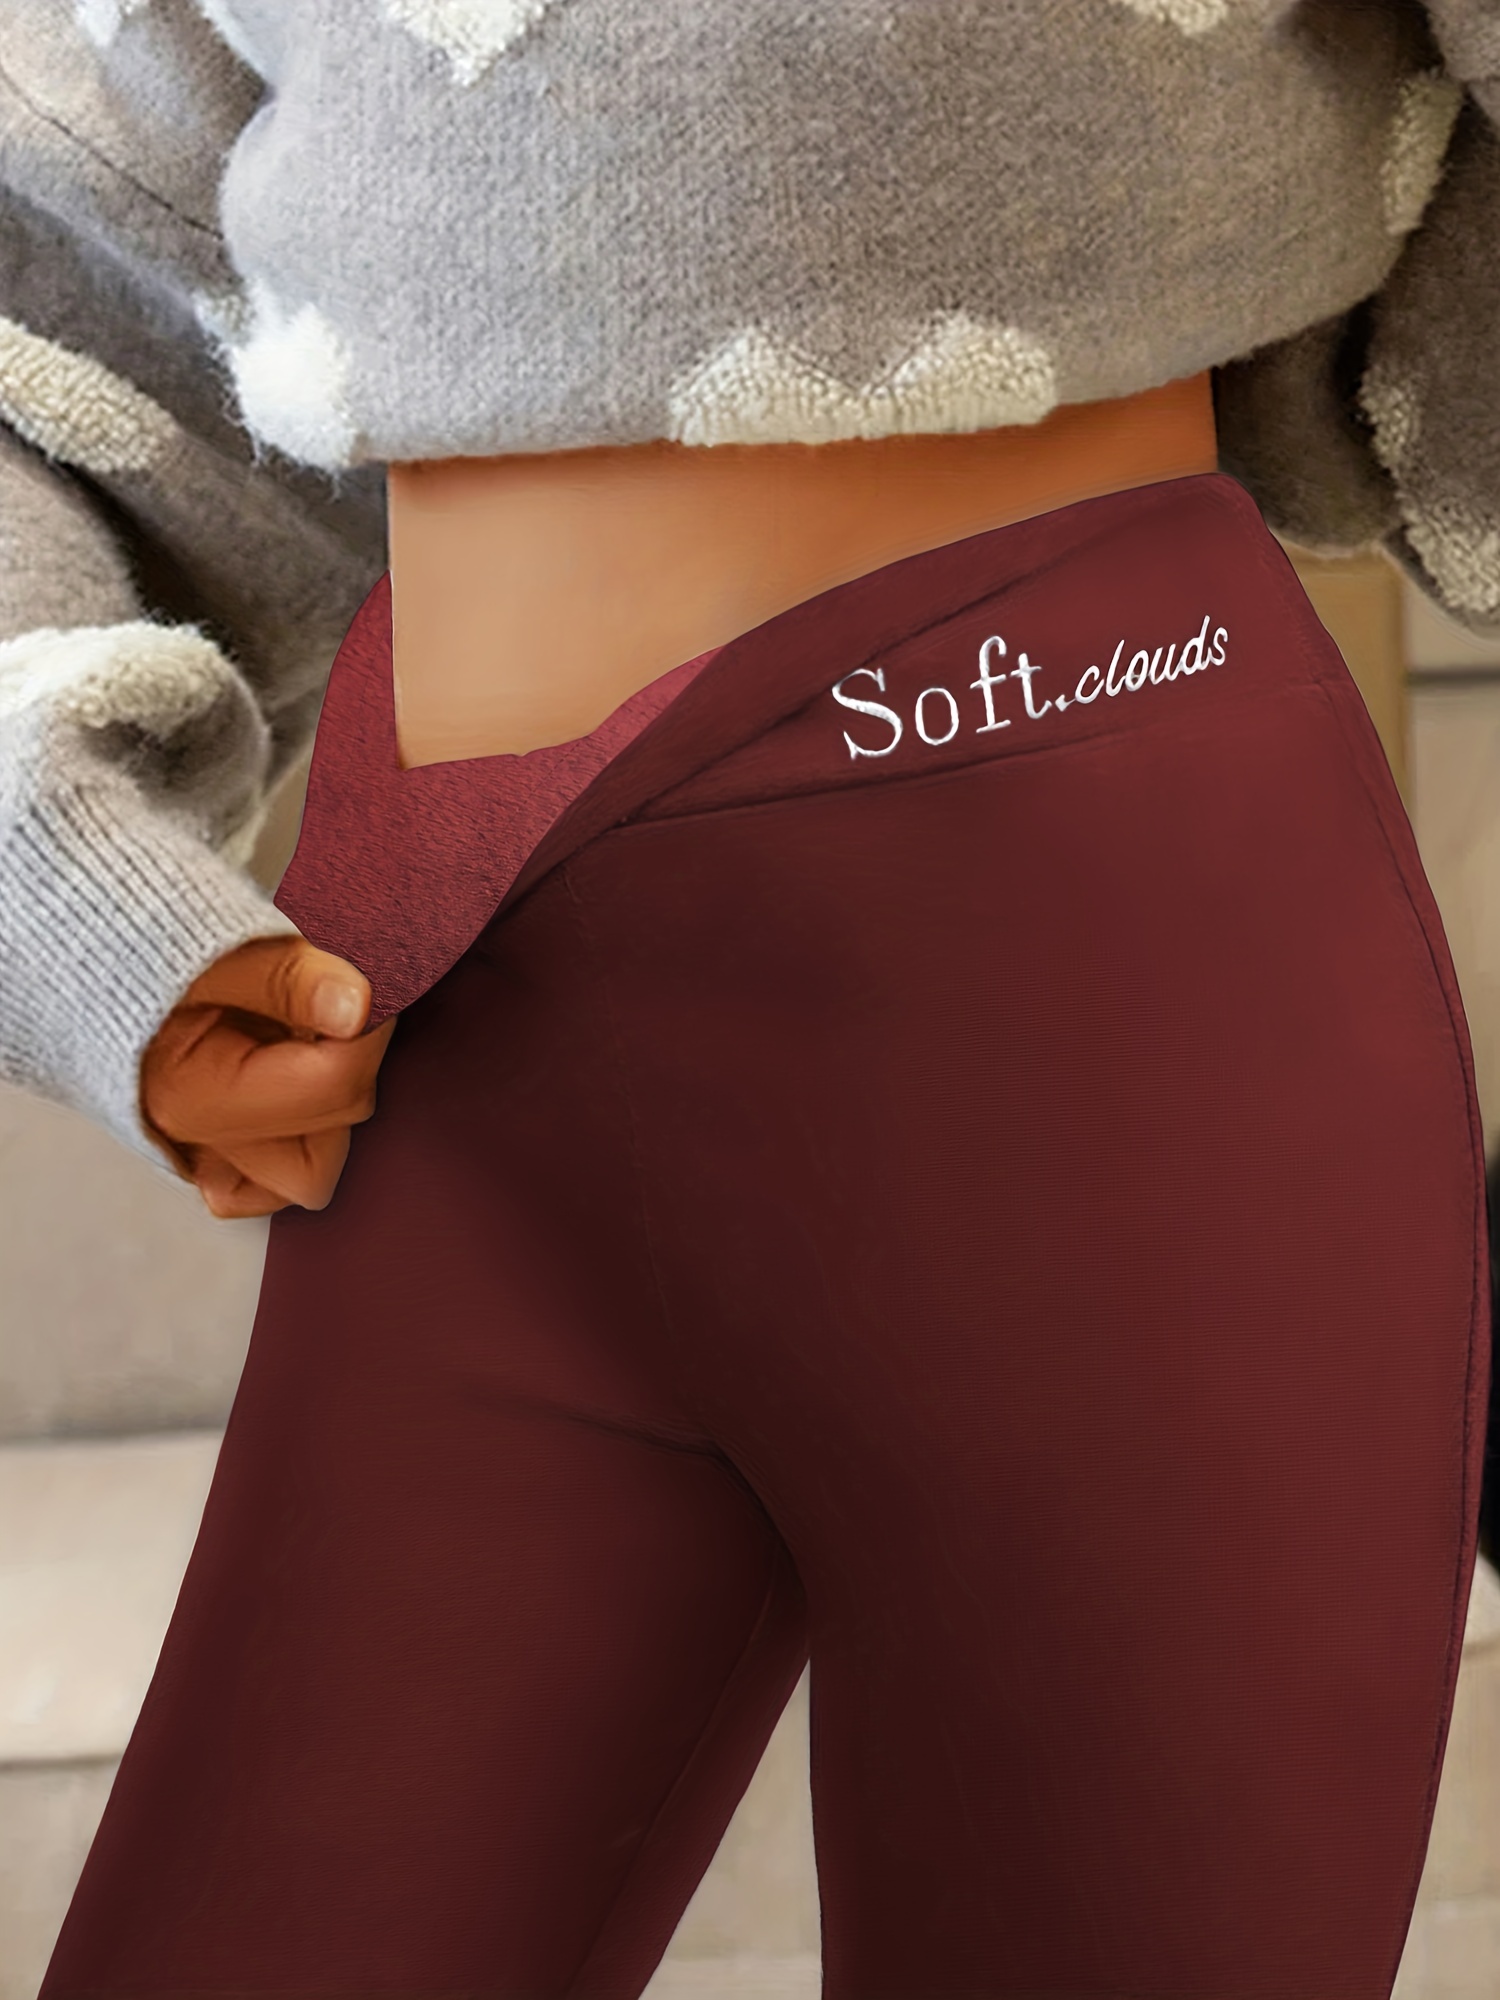 Casual Warm Winter Solid Pants,soft Clouds Fleece Leggings For Women  Winter,tight And Confortable Warmer Legging